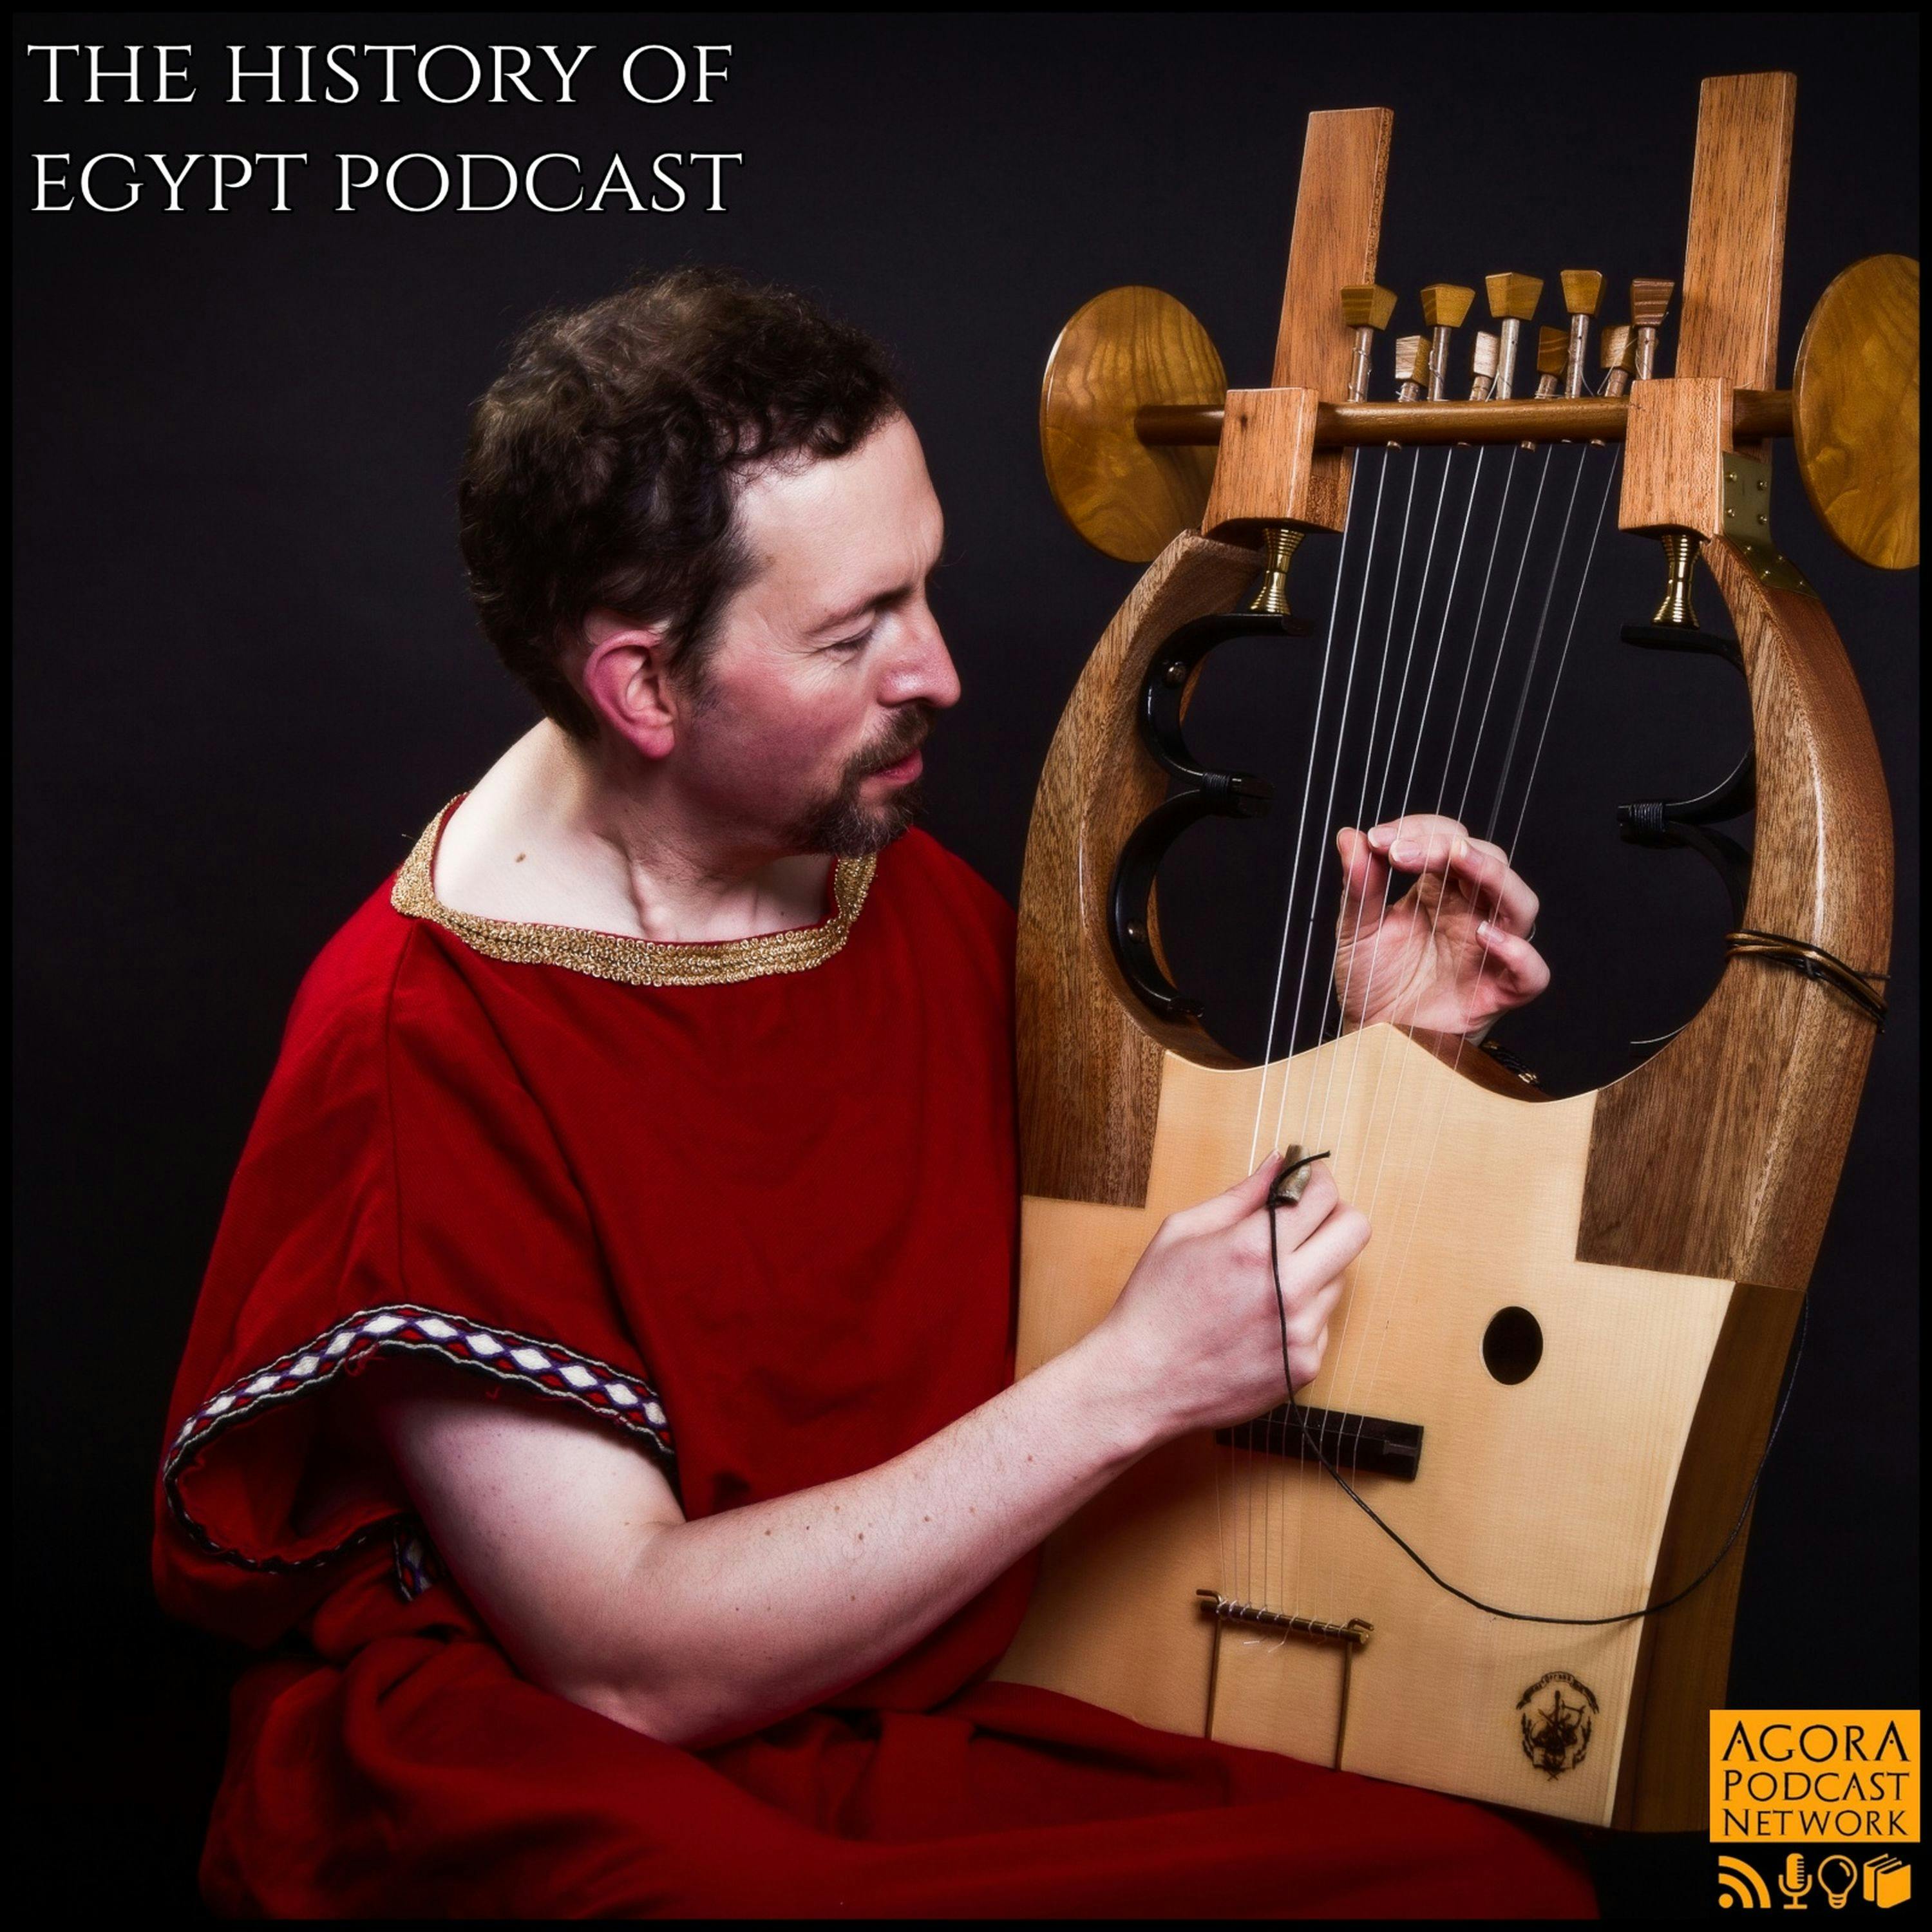 Interview: An Ancient Lyre, with Michael Levy